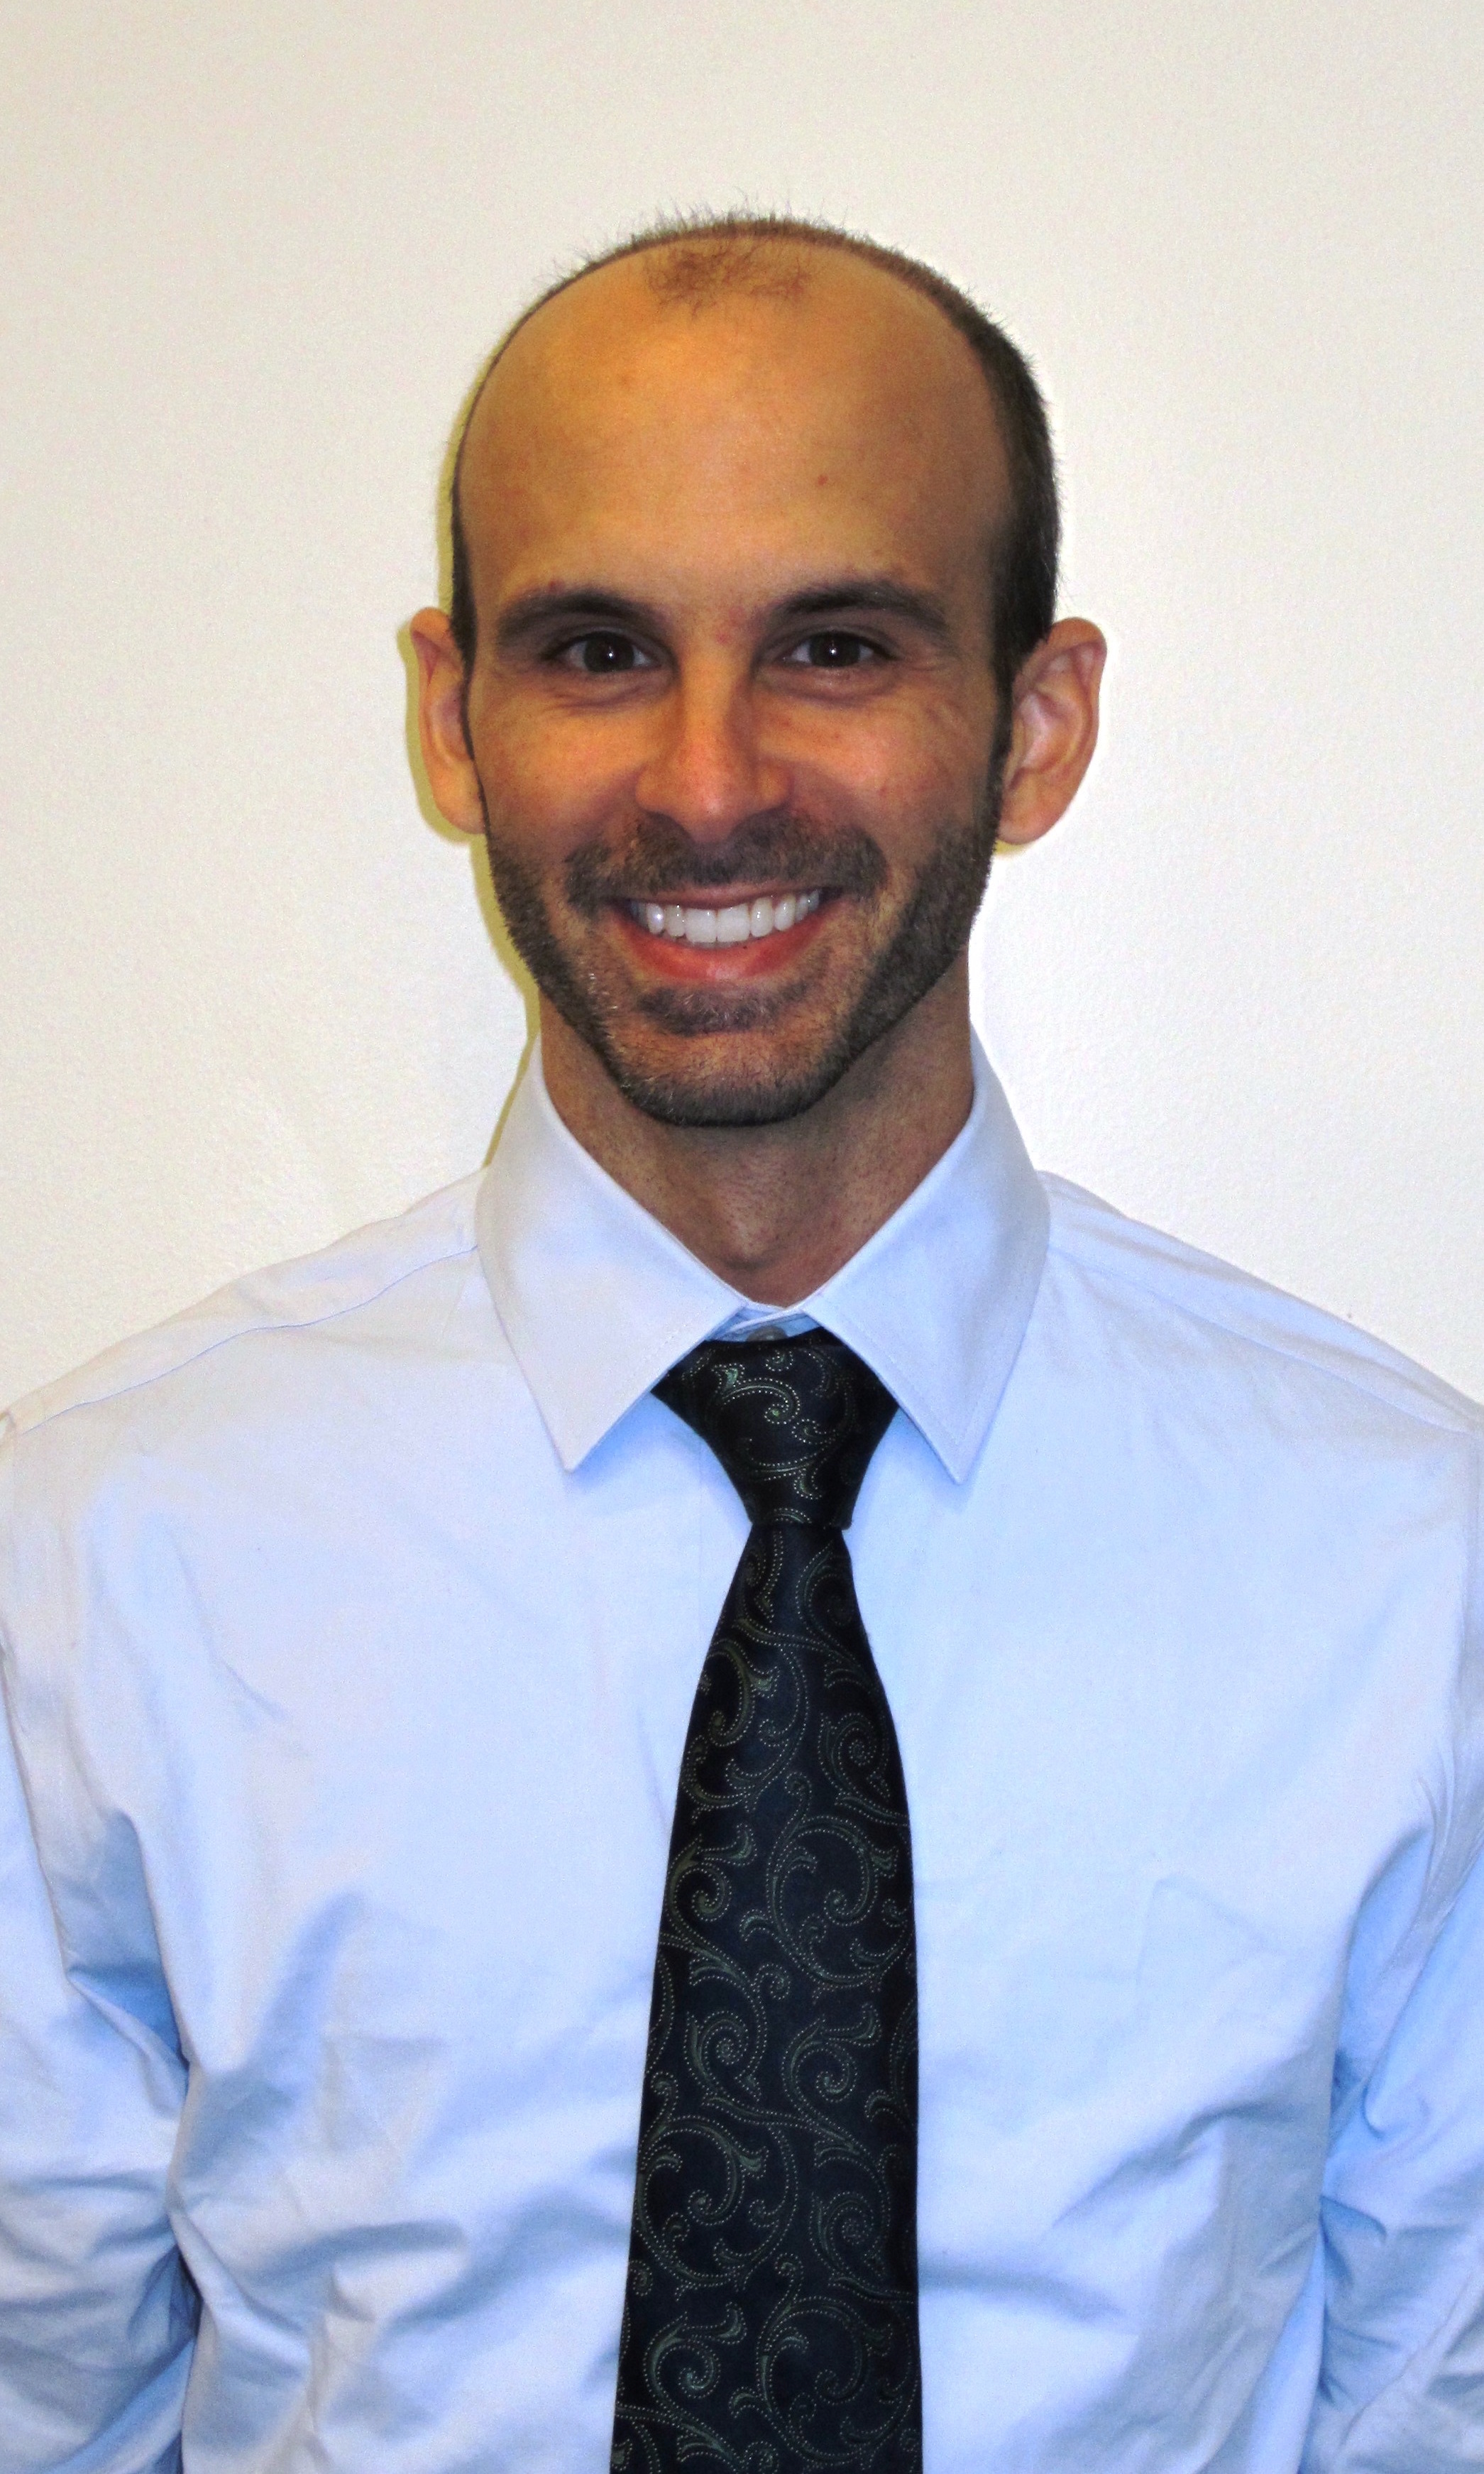 Bio headshot photo of Dr.Brian A. DiGangi, smiling, wearing a blue shirt and dark tie